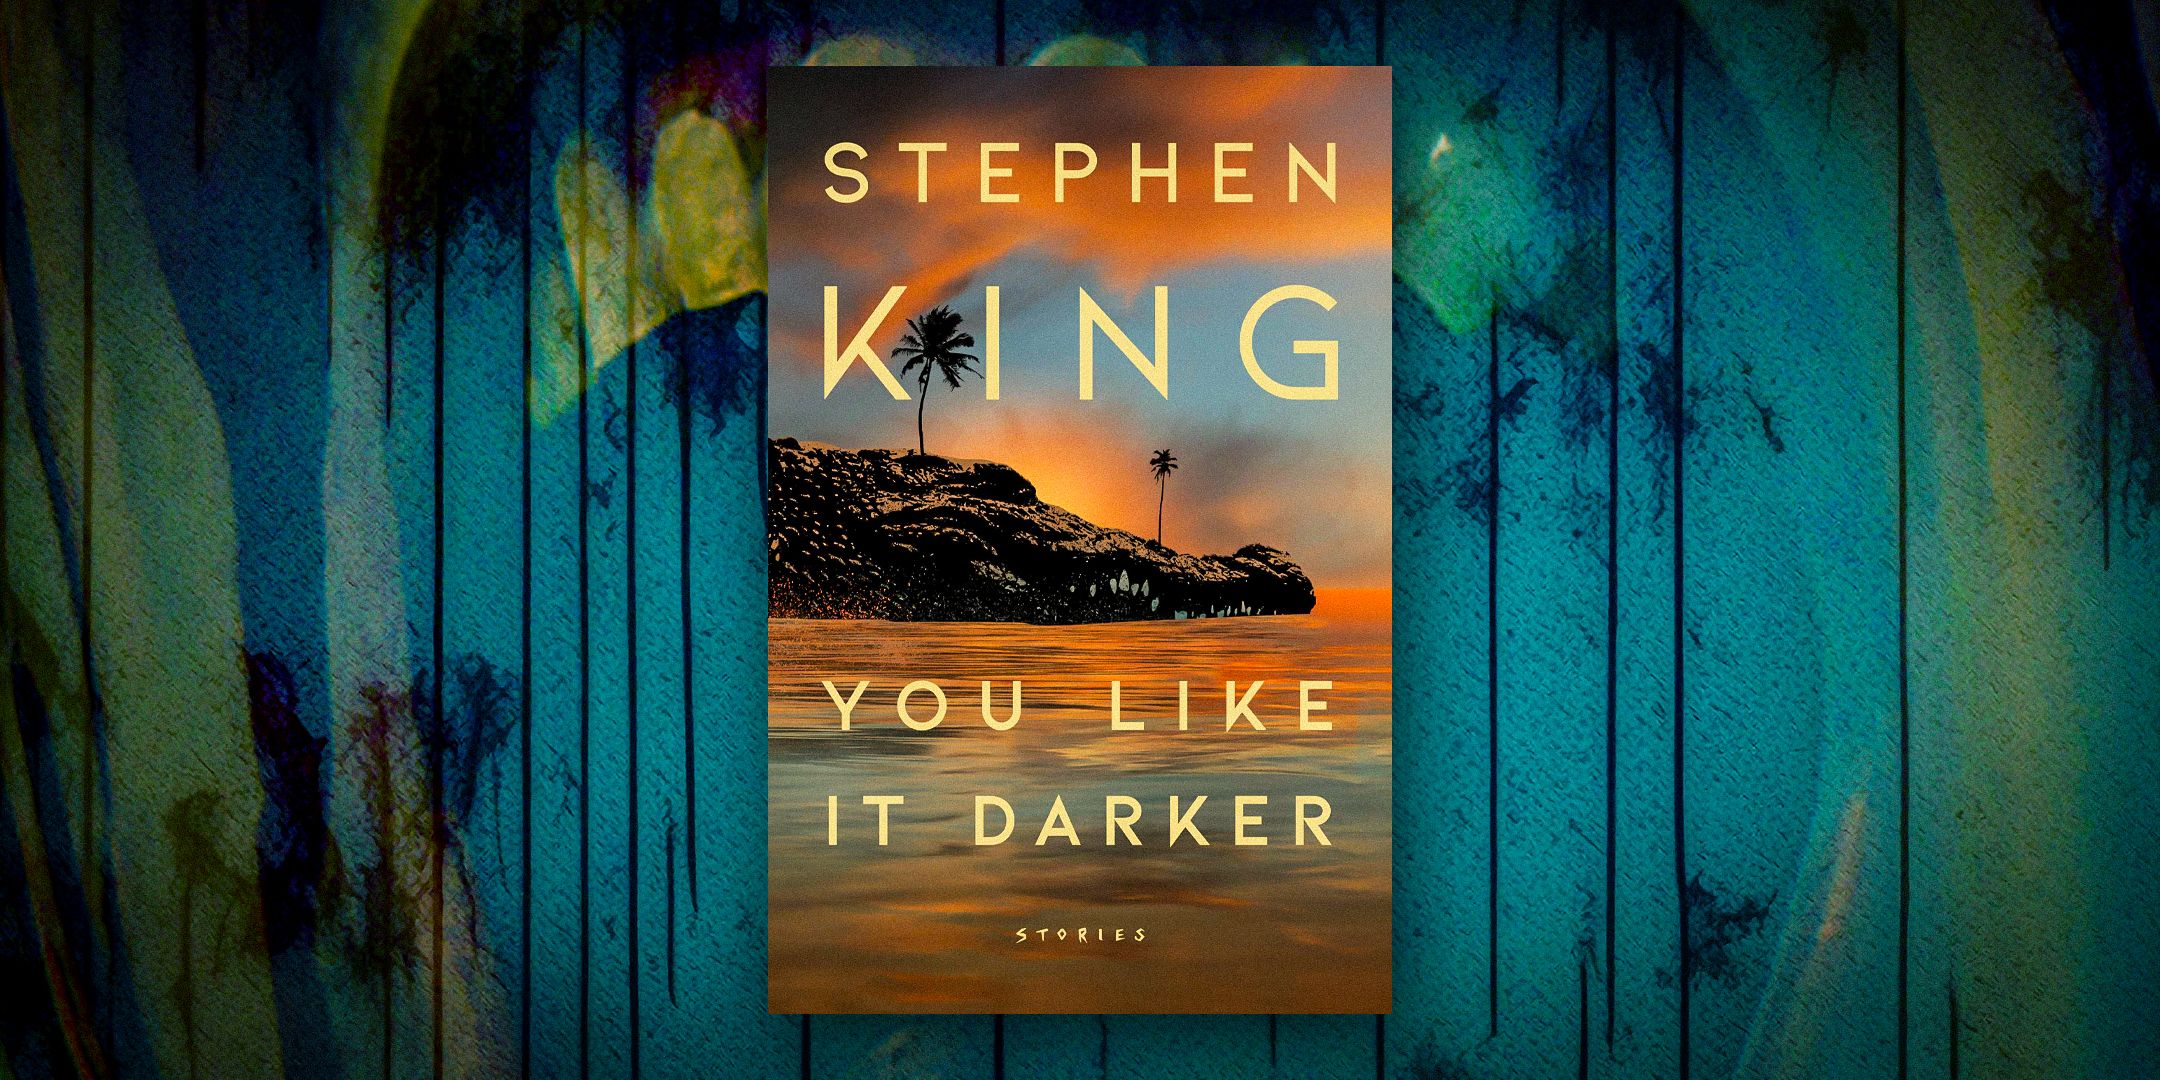 The cover of Stephen King's 